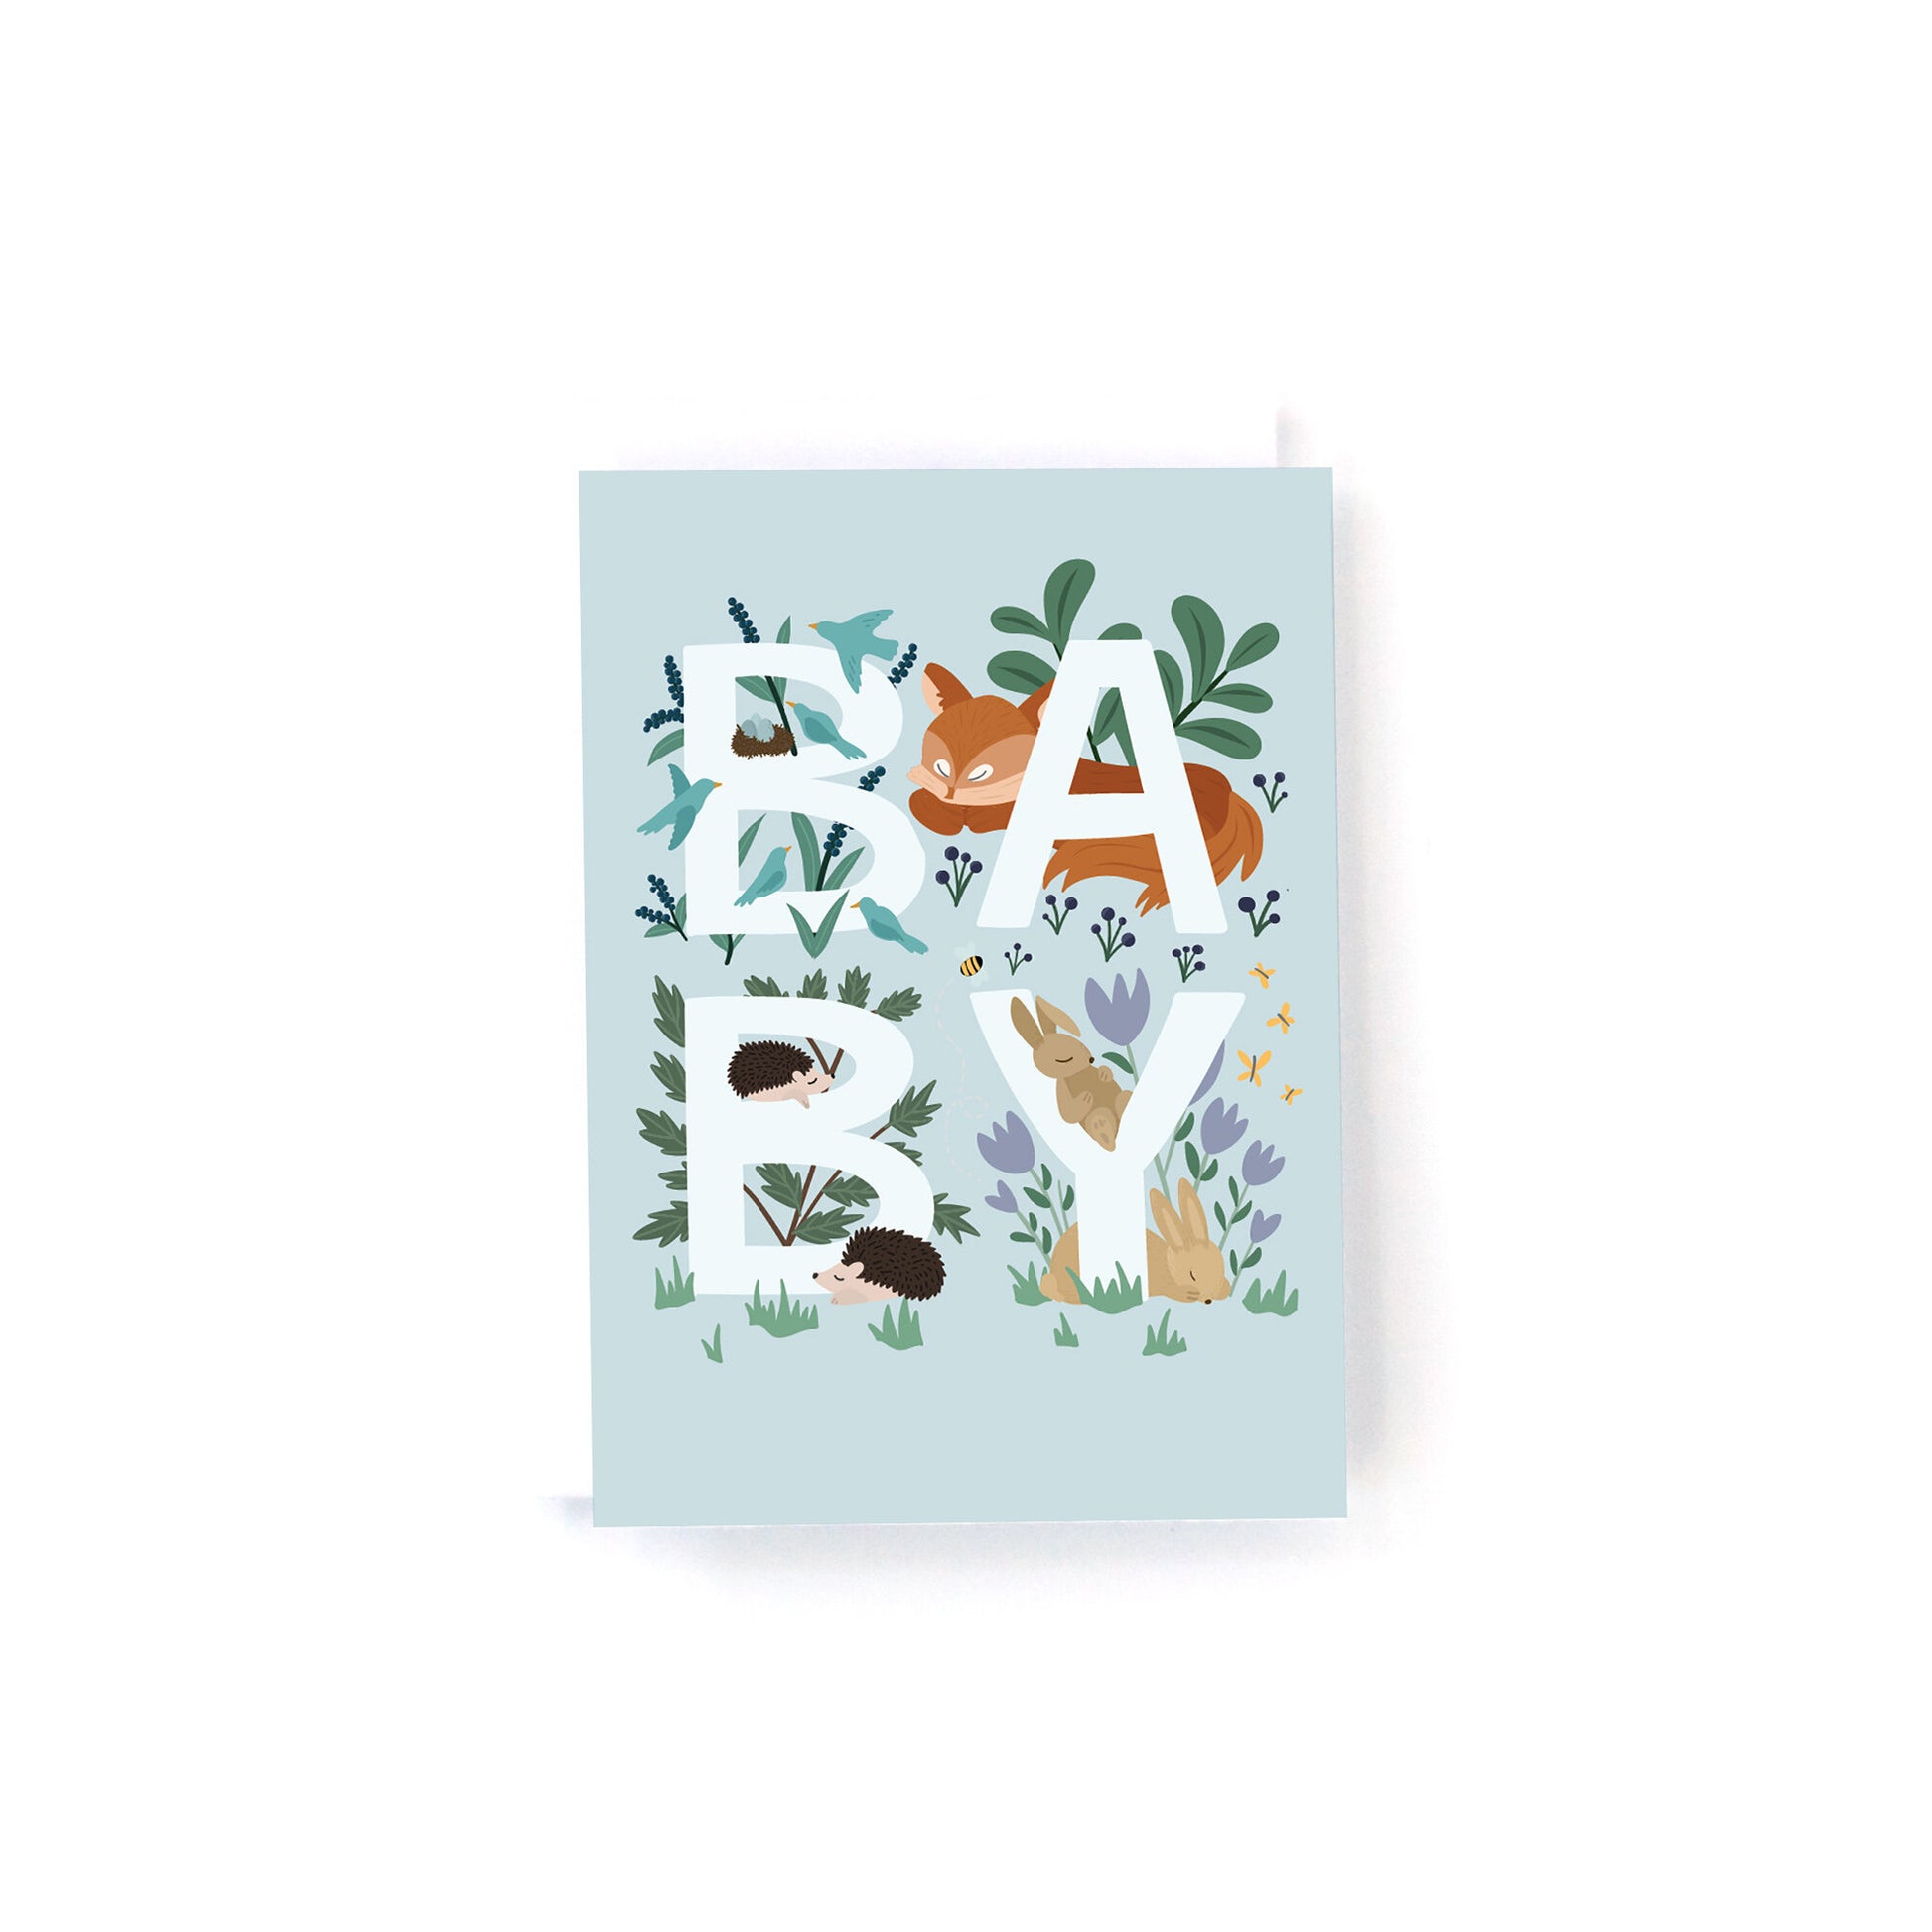 Mini Enclosure new baby card with woodland animals and plants surrounding the letters BABY on a blue background.